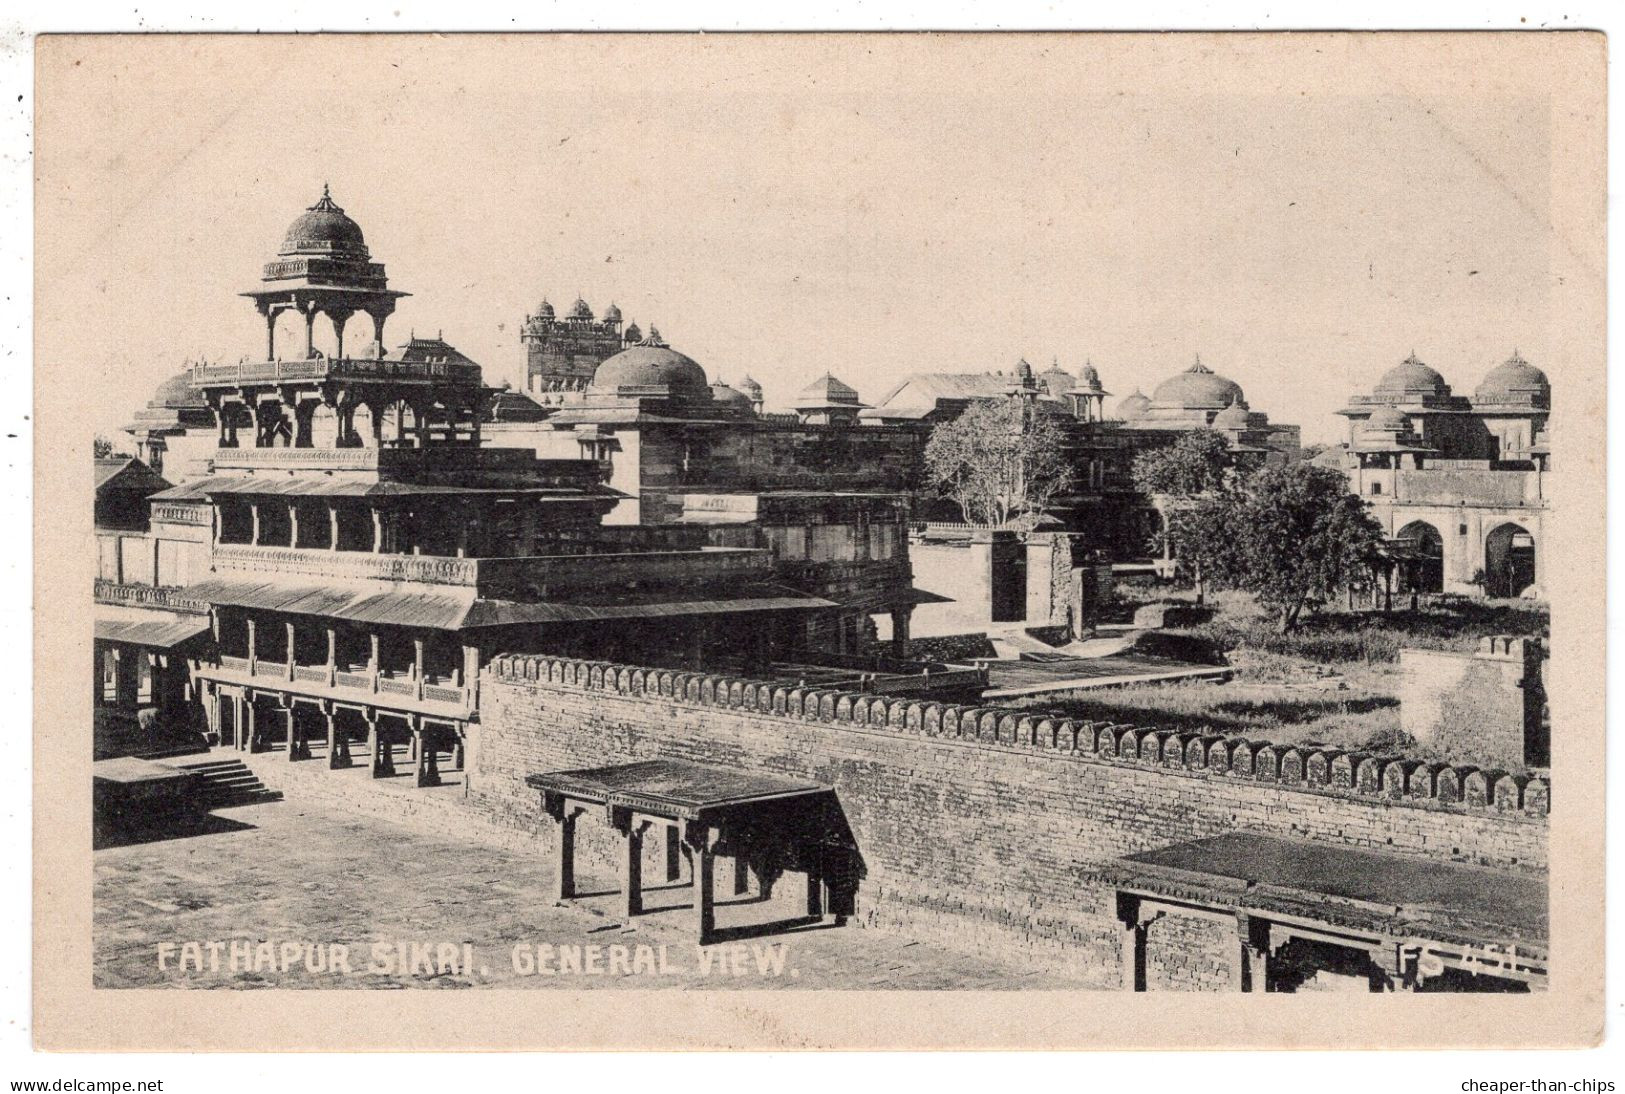 FATHAPUR SIKRI - General View - Macropolo  F.S. 451 - India